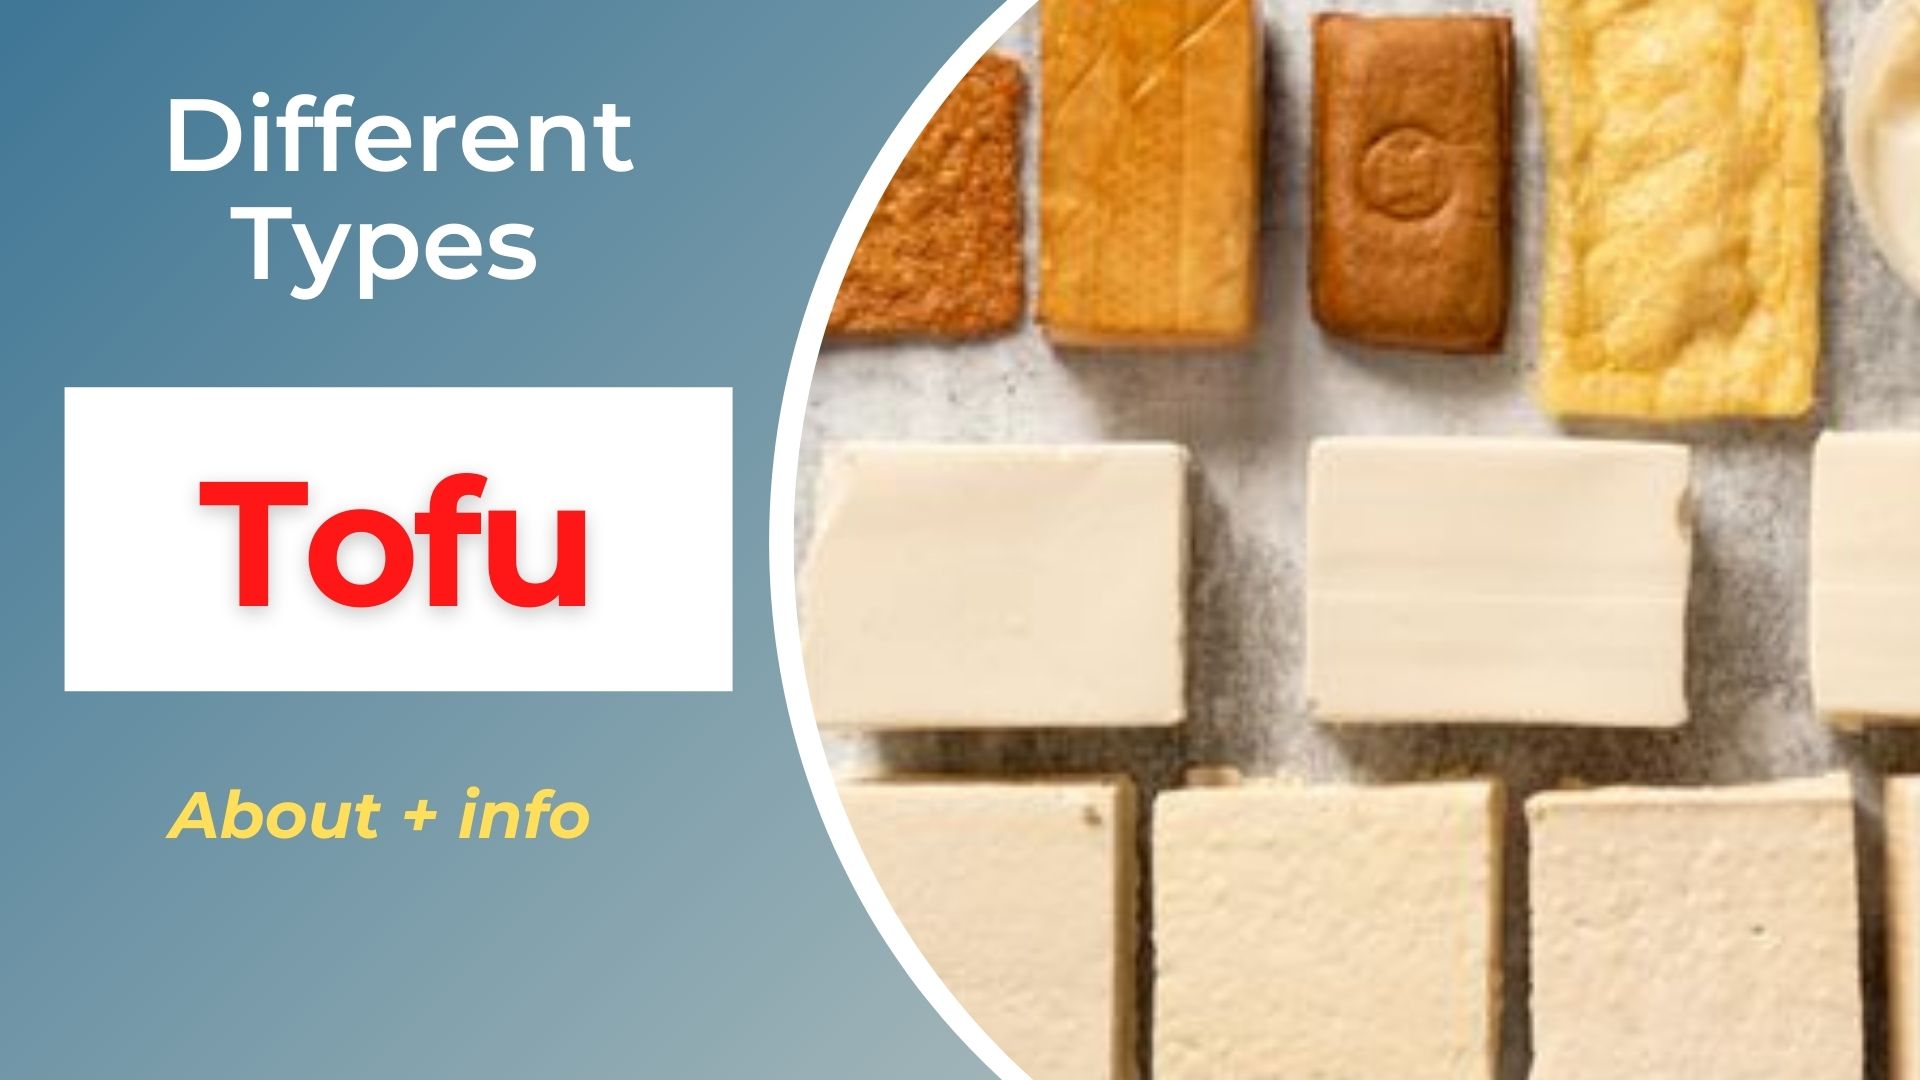 Different Types of Tofu